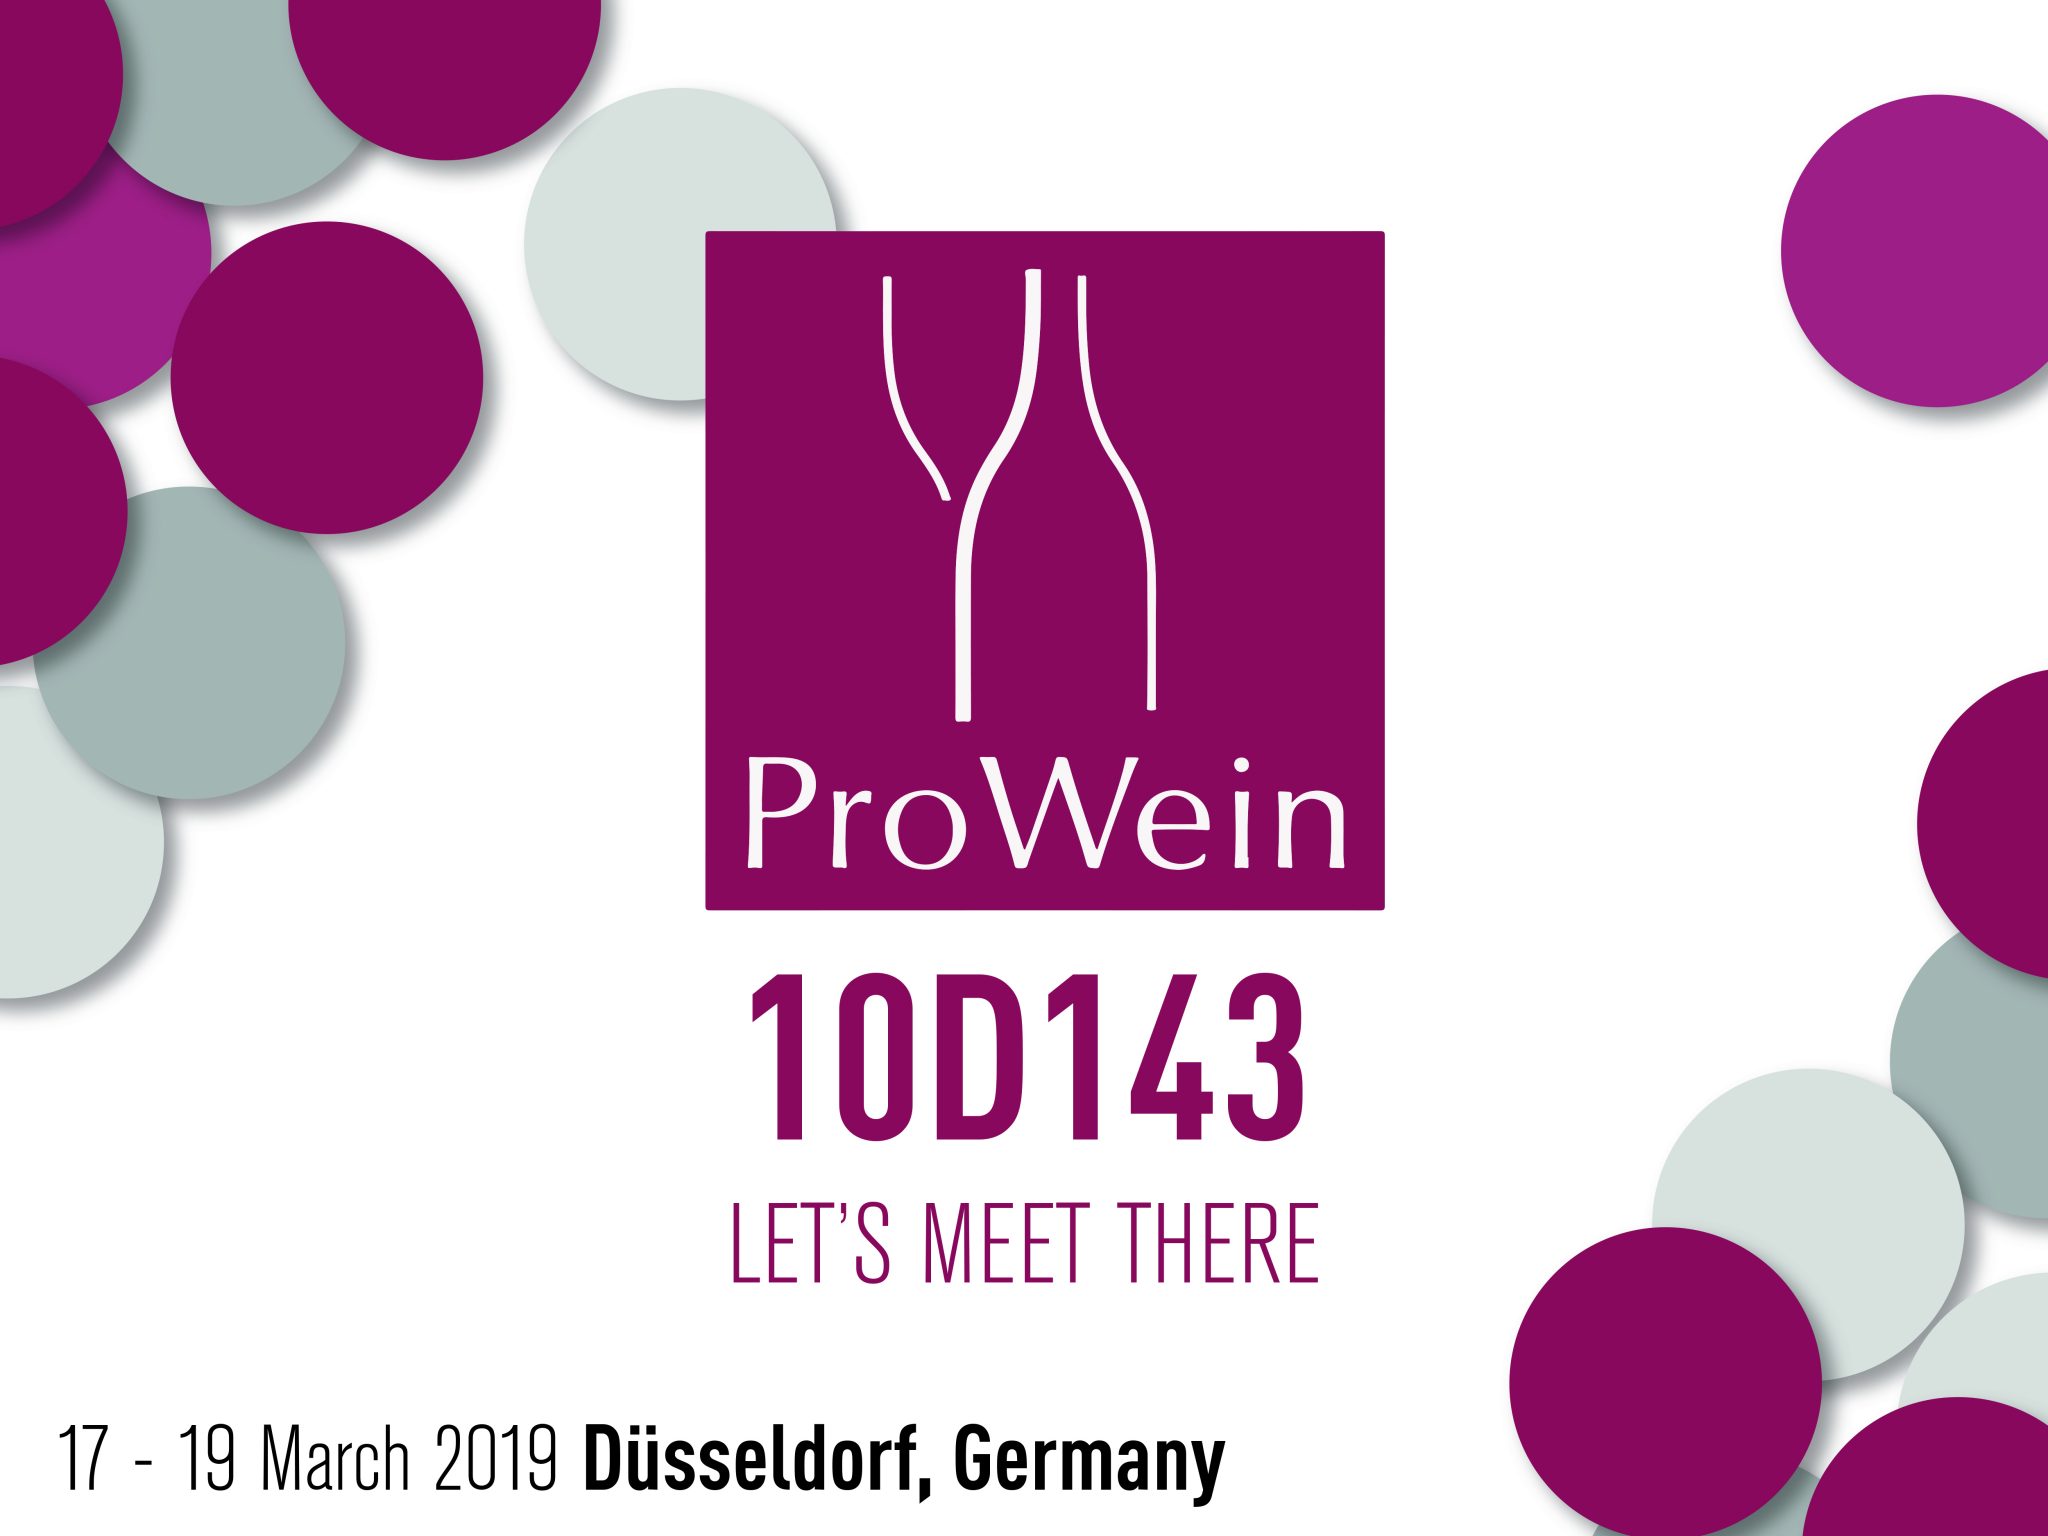 Hispanobodegas is ready for Prowein 2019